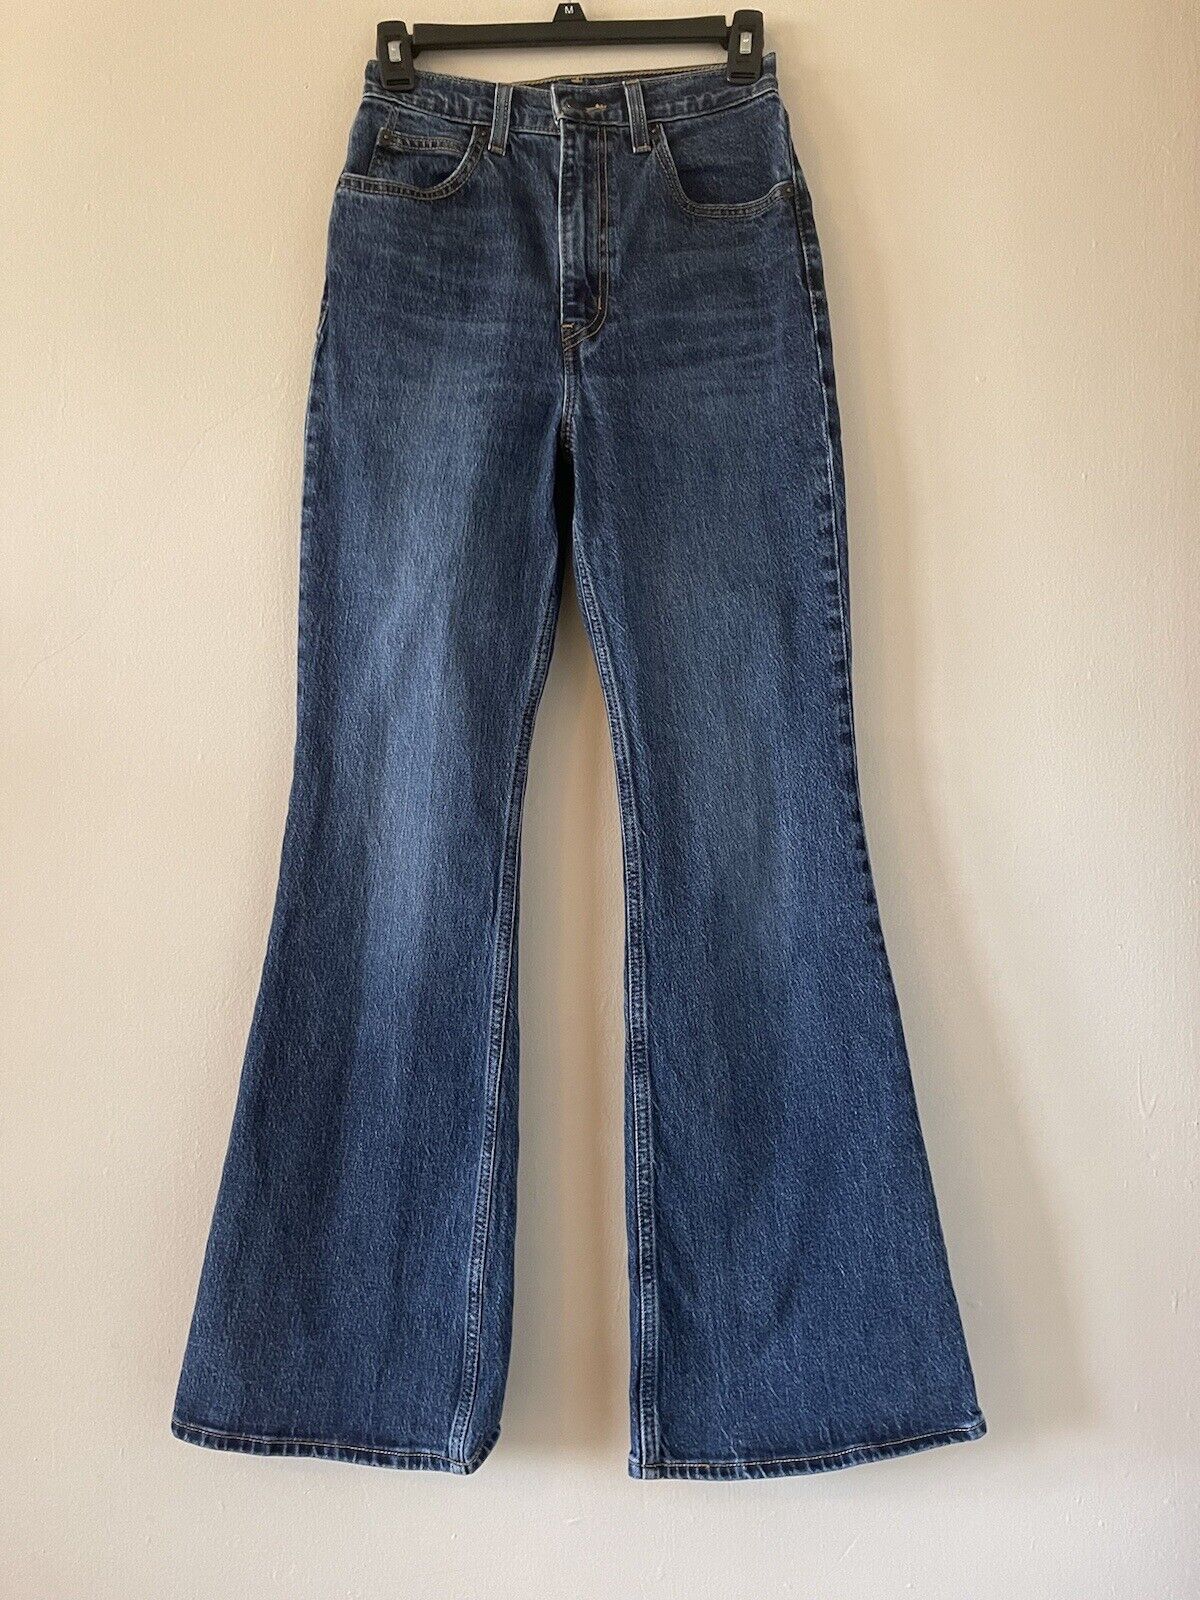 Levi’s 70’s High Flare Size 25 - image 4